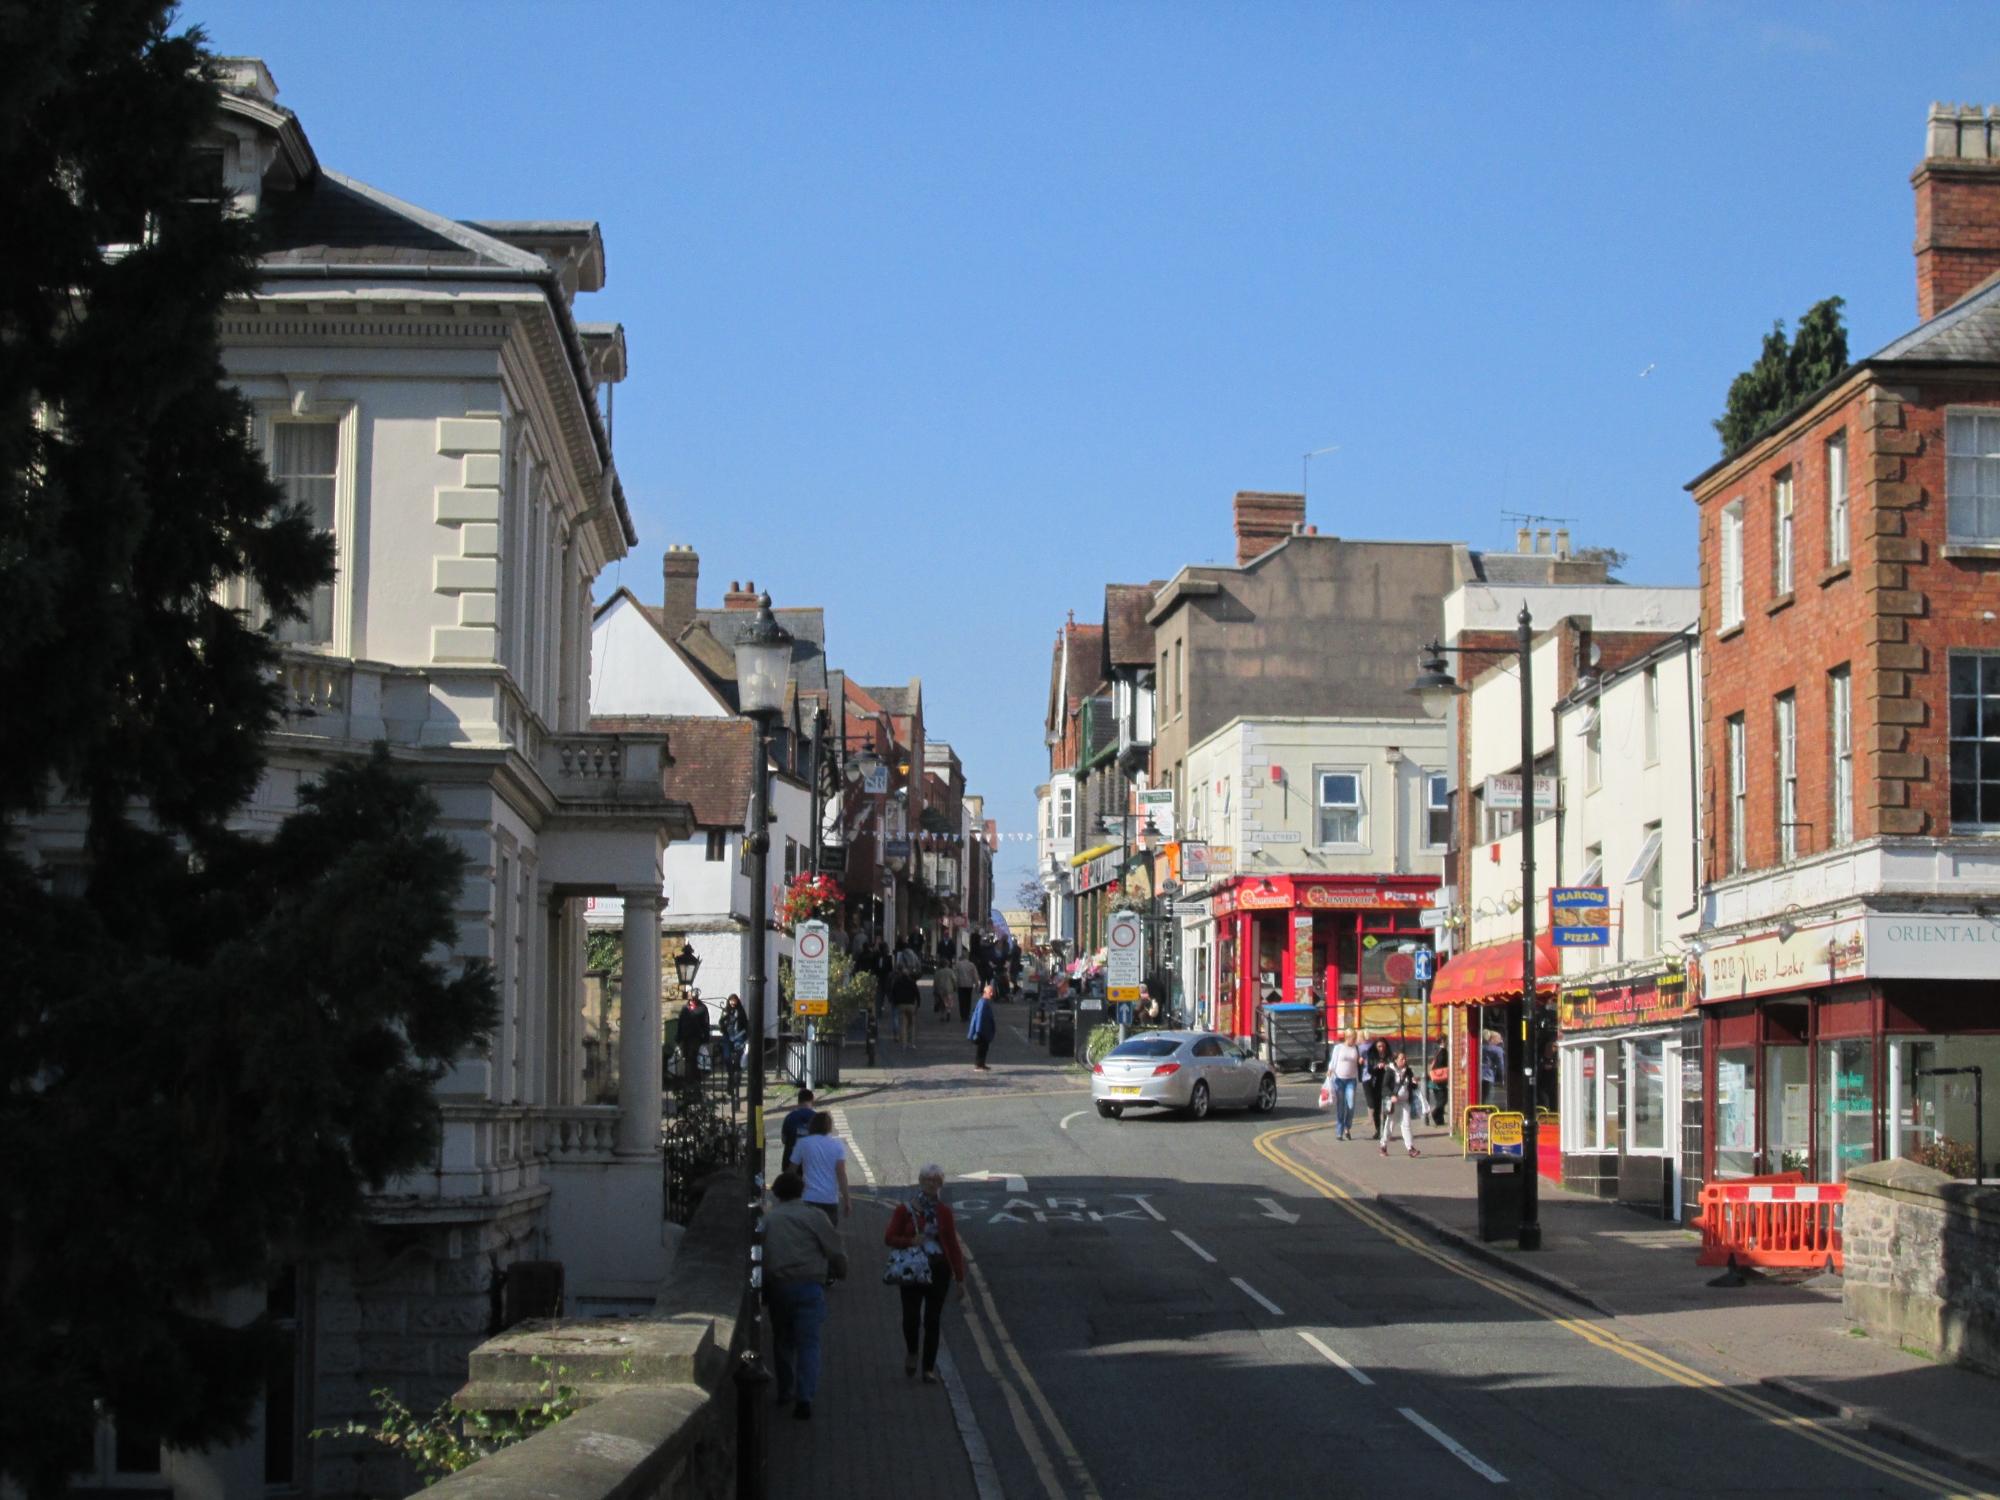 EVESHAM TOWN CENTRE: All You Need to Know BEFORE You Go (with Photos)